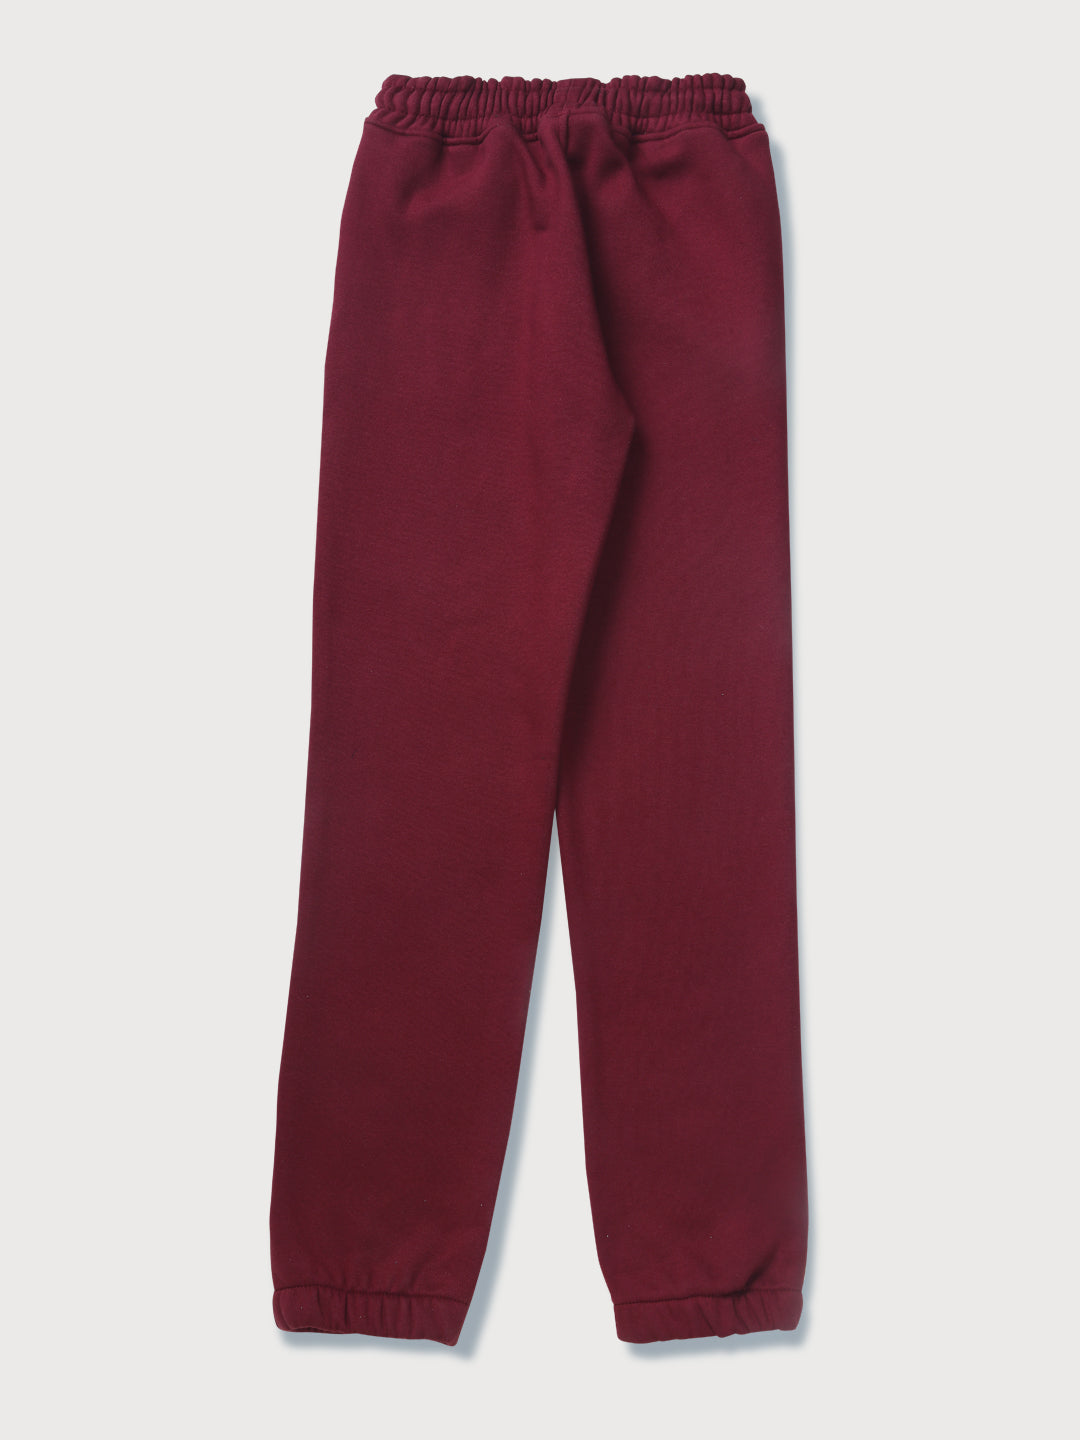 Girls Red Printed Cotton Track Pant